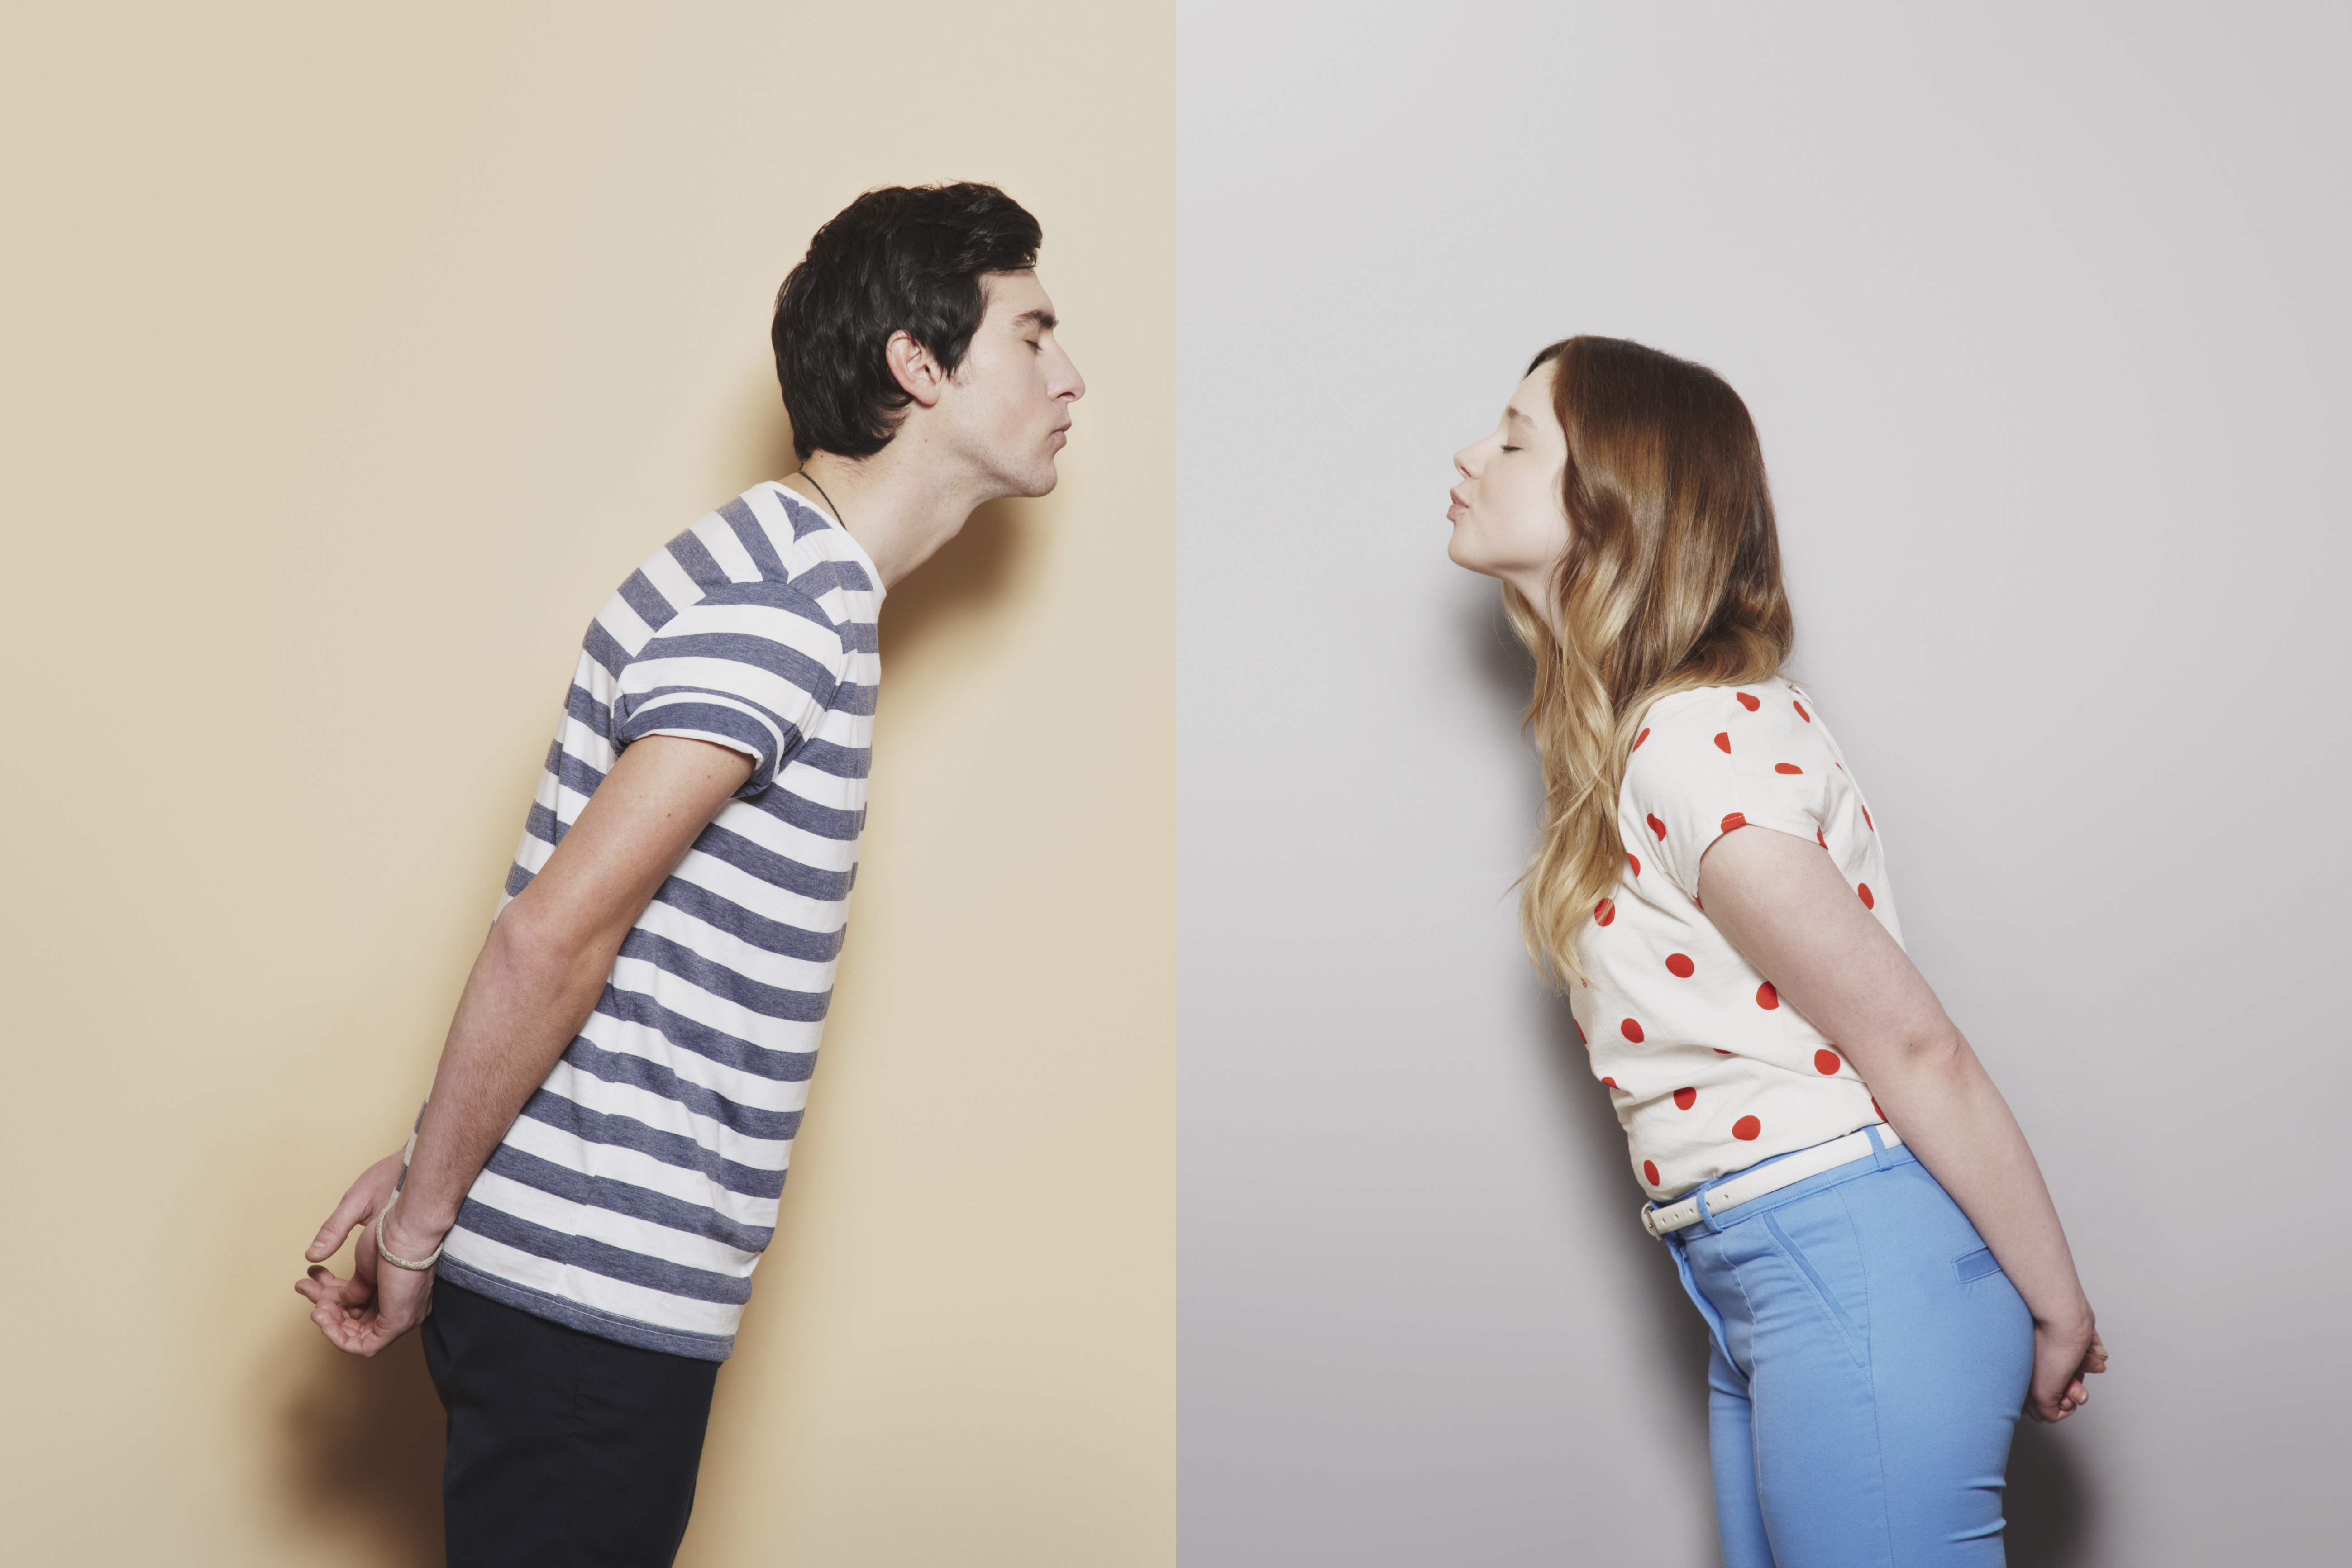 Teen Boys and Girls Equally Fantasize About Sex | Time